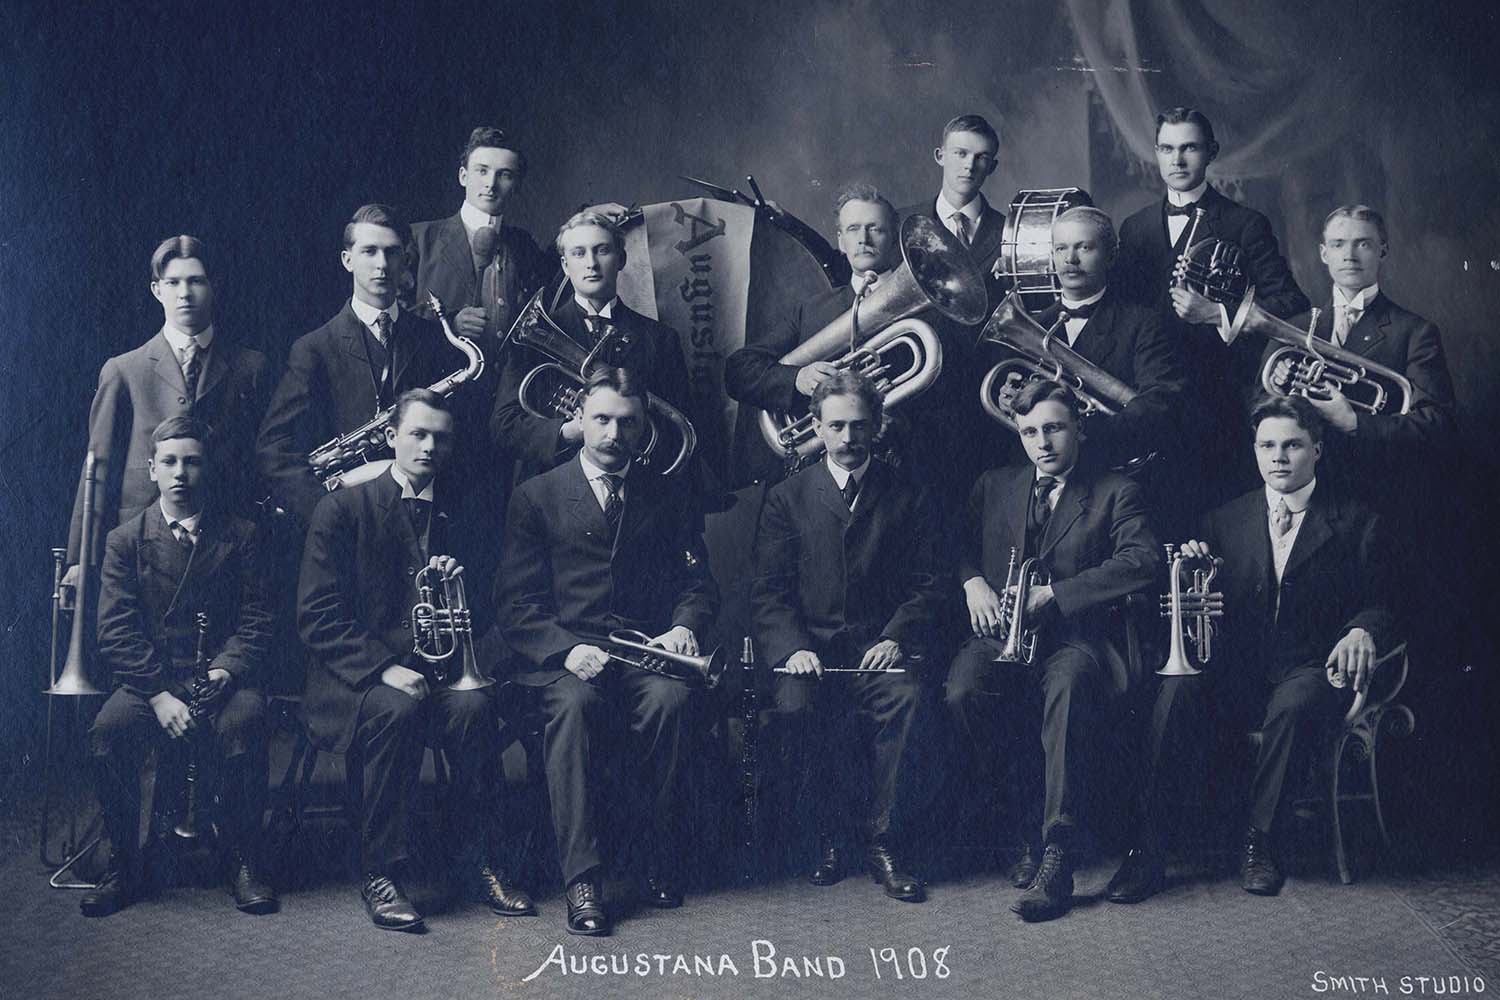 Augustana Band in 1908